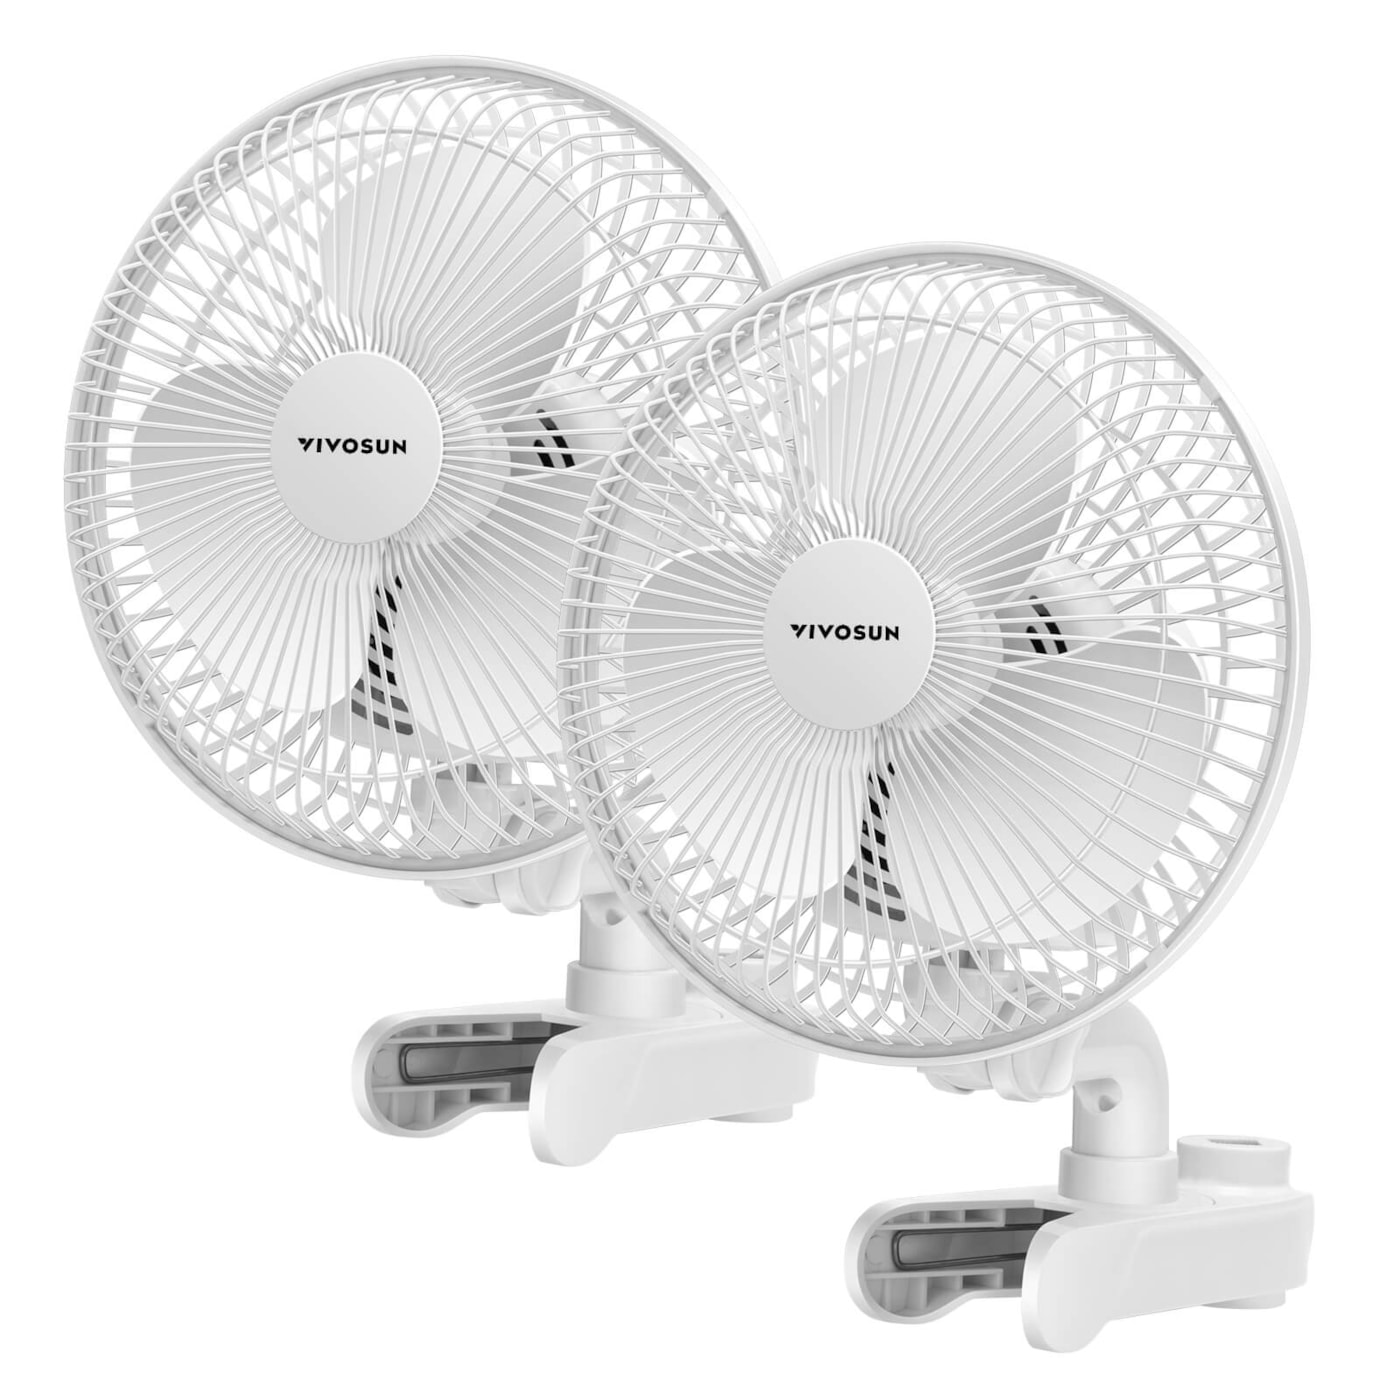 VIVOSUN AeroWave A6 Patented Clip-On Fan with 2-Speed Adjustment, 2 Pack - White